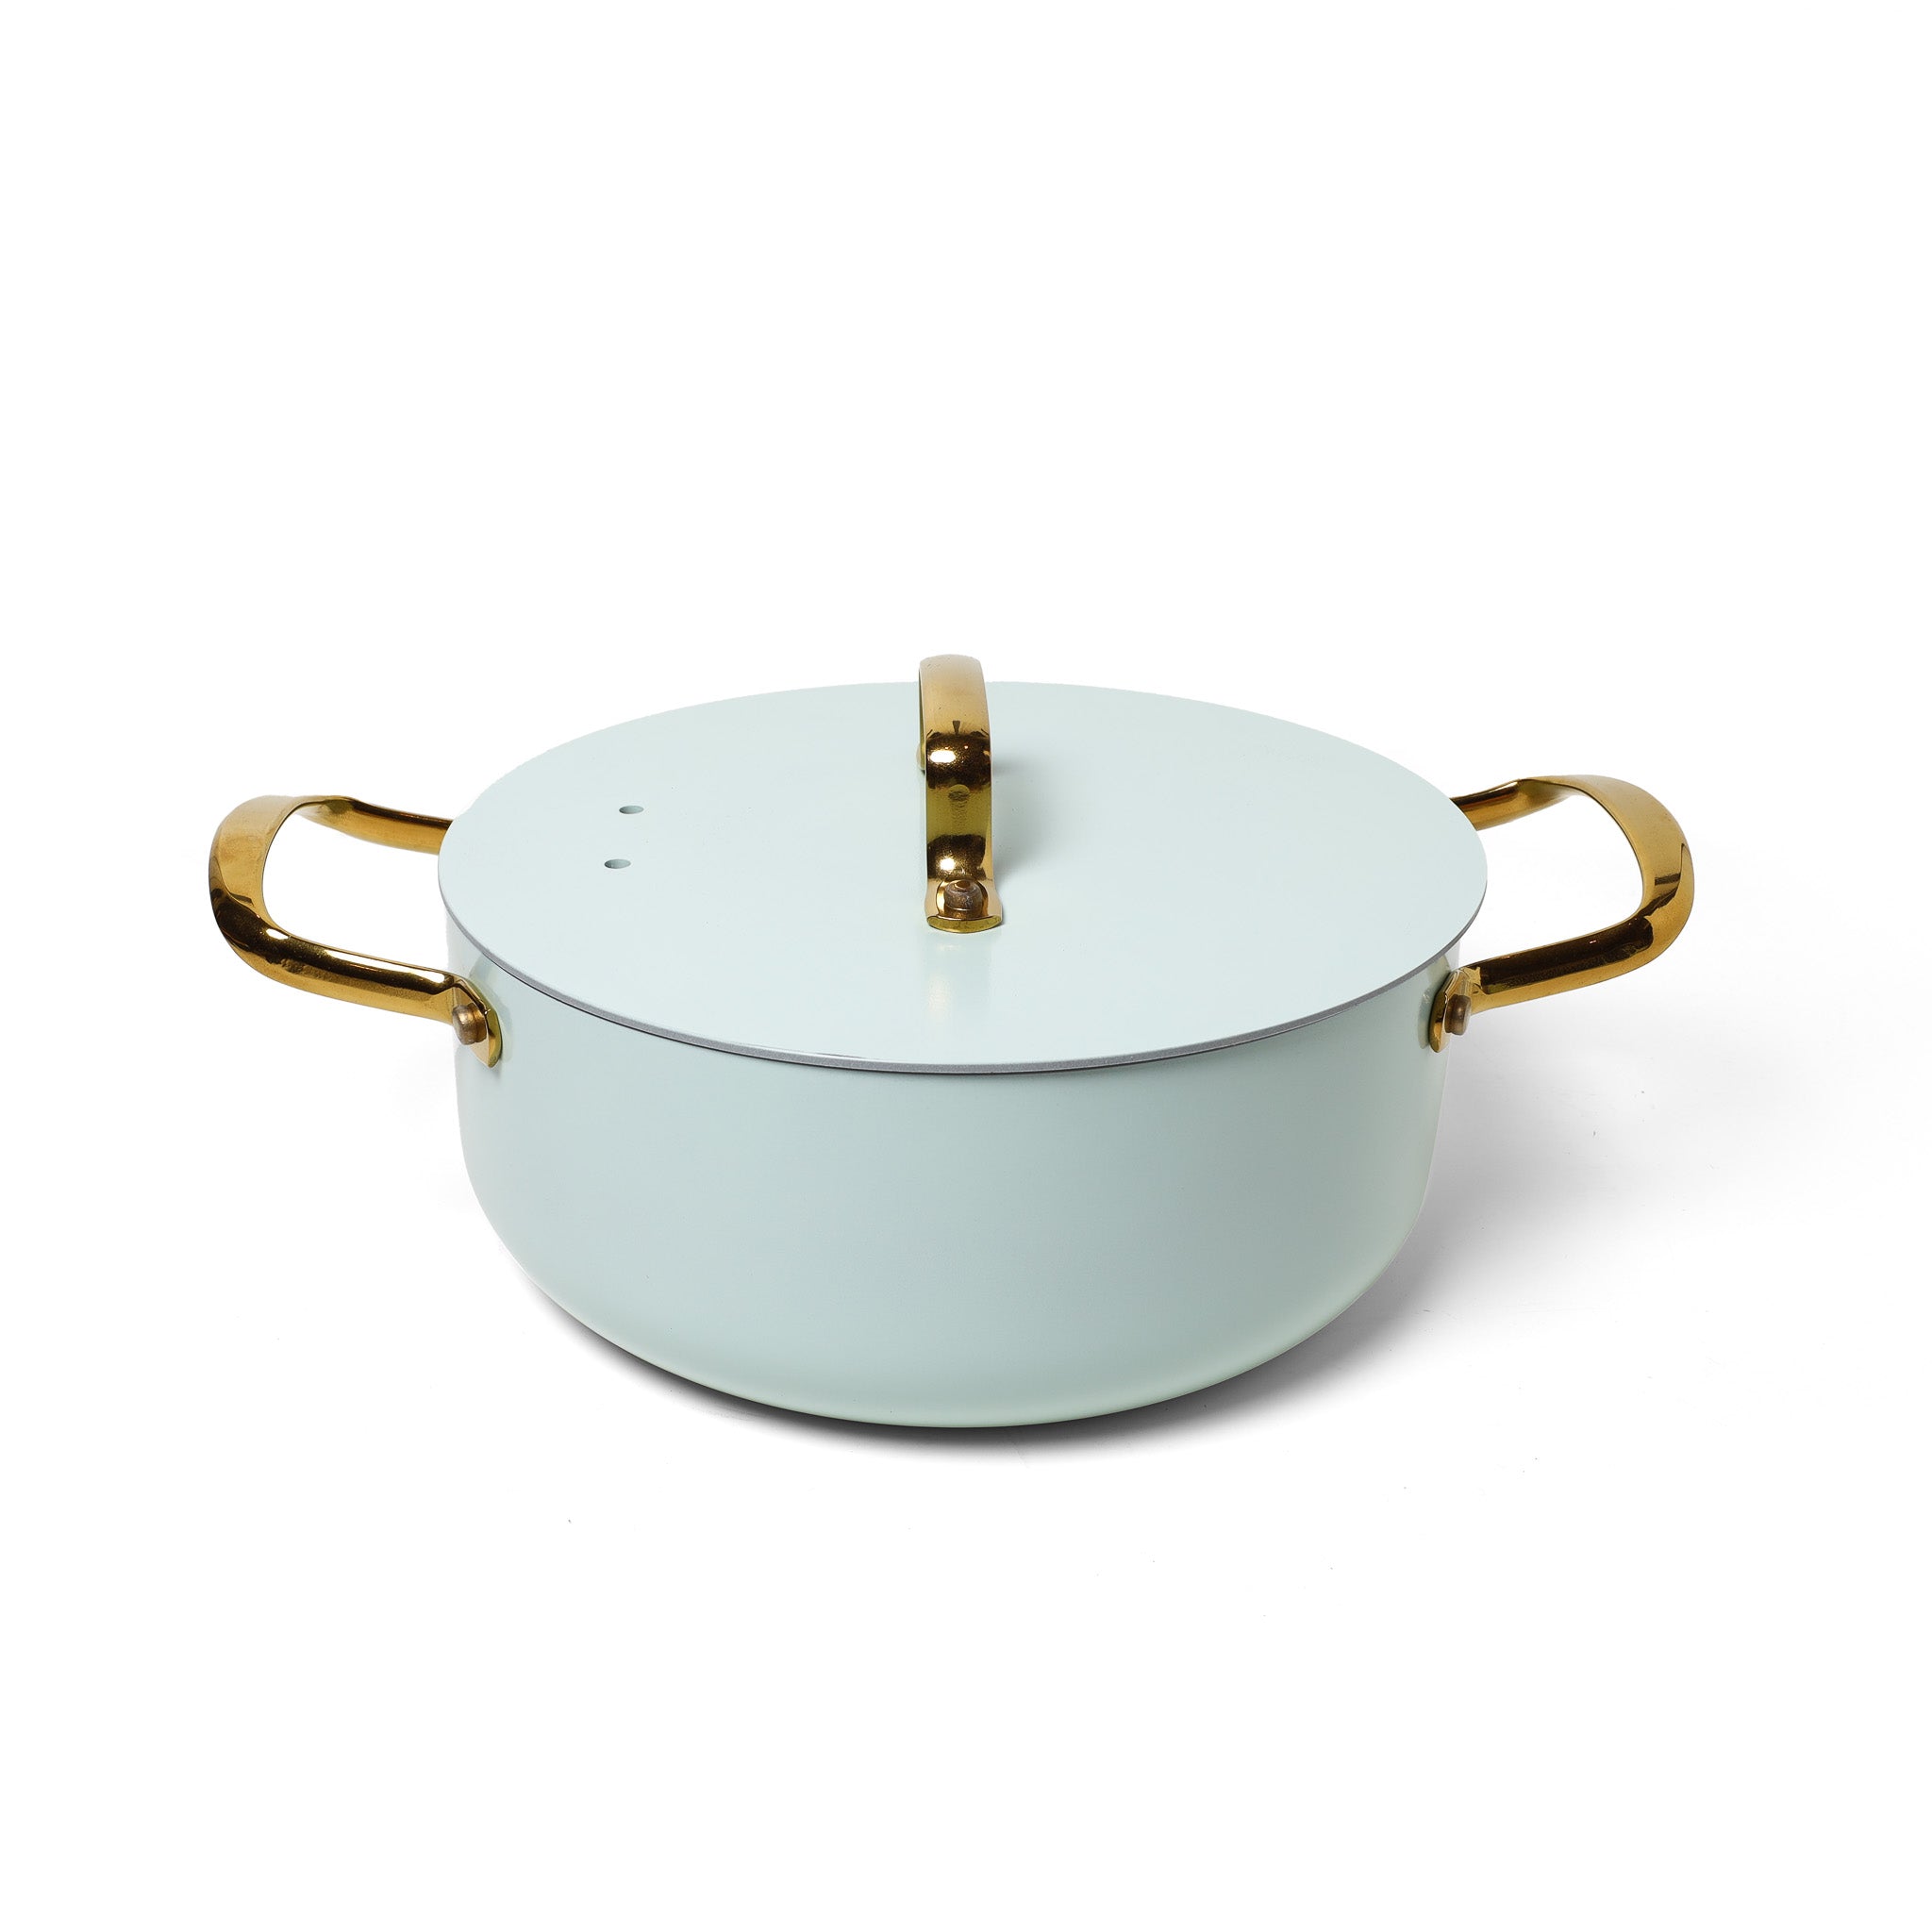 PHANTOM CHEF 4.2 QT Dutch Oven Pot with Lid,Non-Stick Ceramic Coating,with  Dual Handles & Handle Covers,PTFE & PFOA Free,Induction